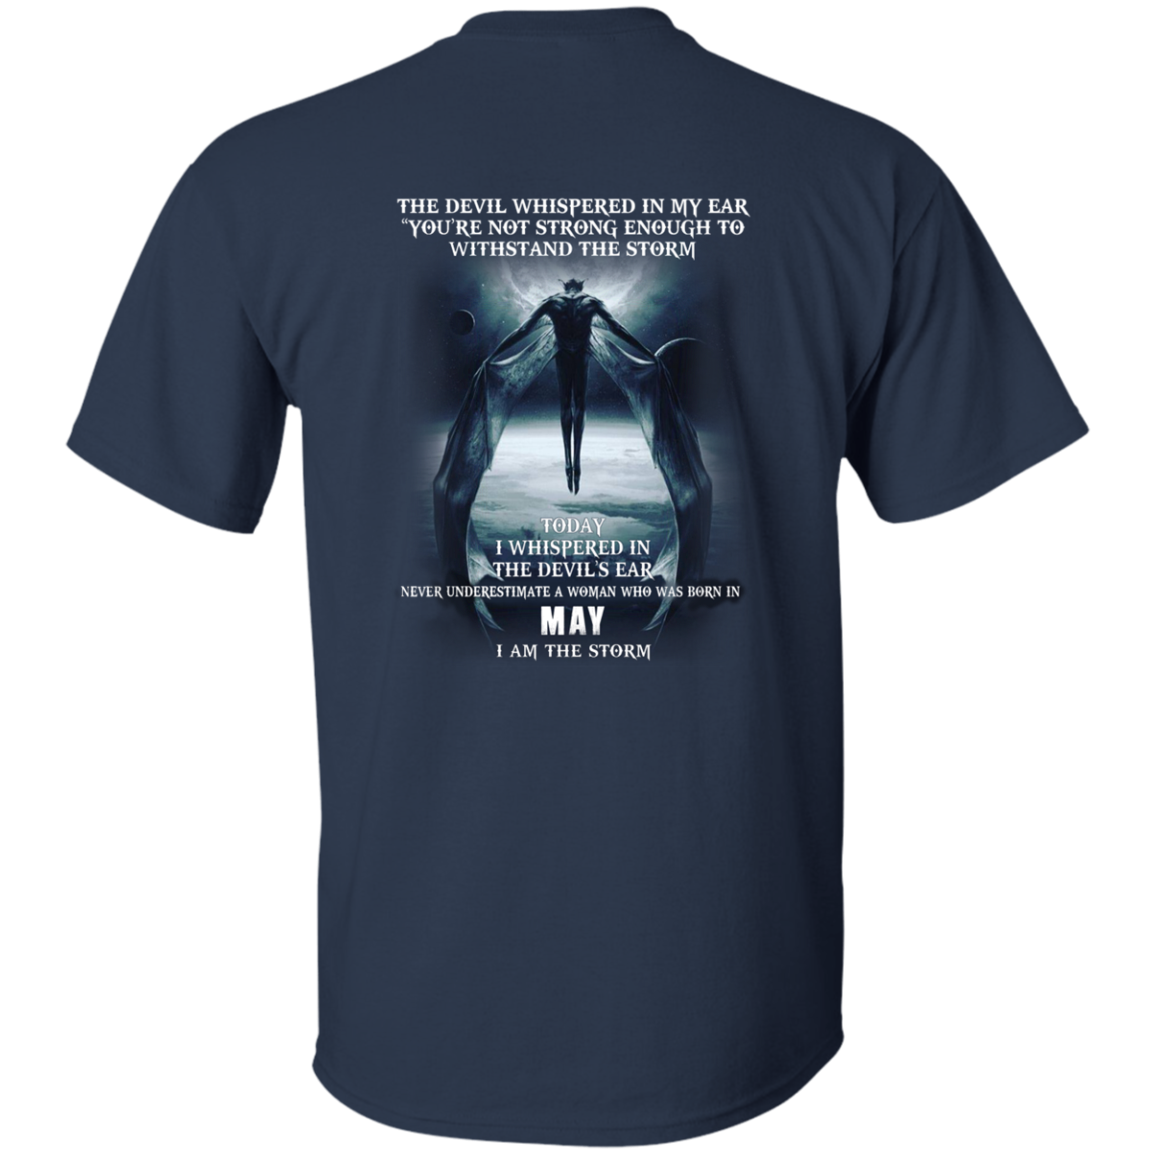 The devil whispered in my ear, a woman was born in May shirt